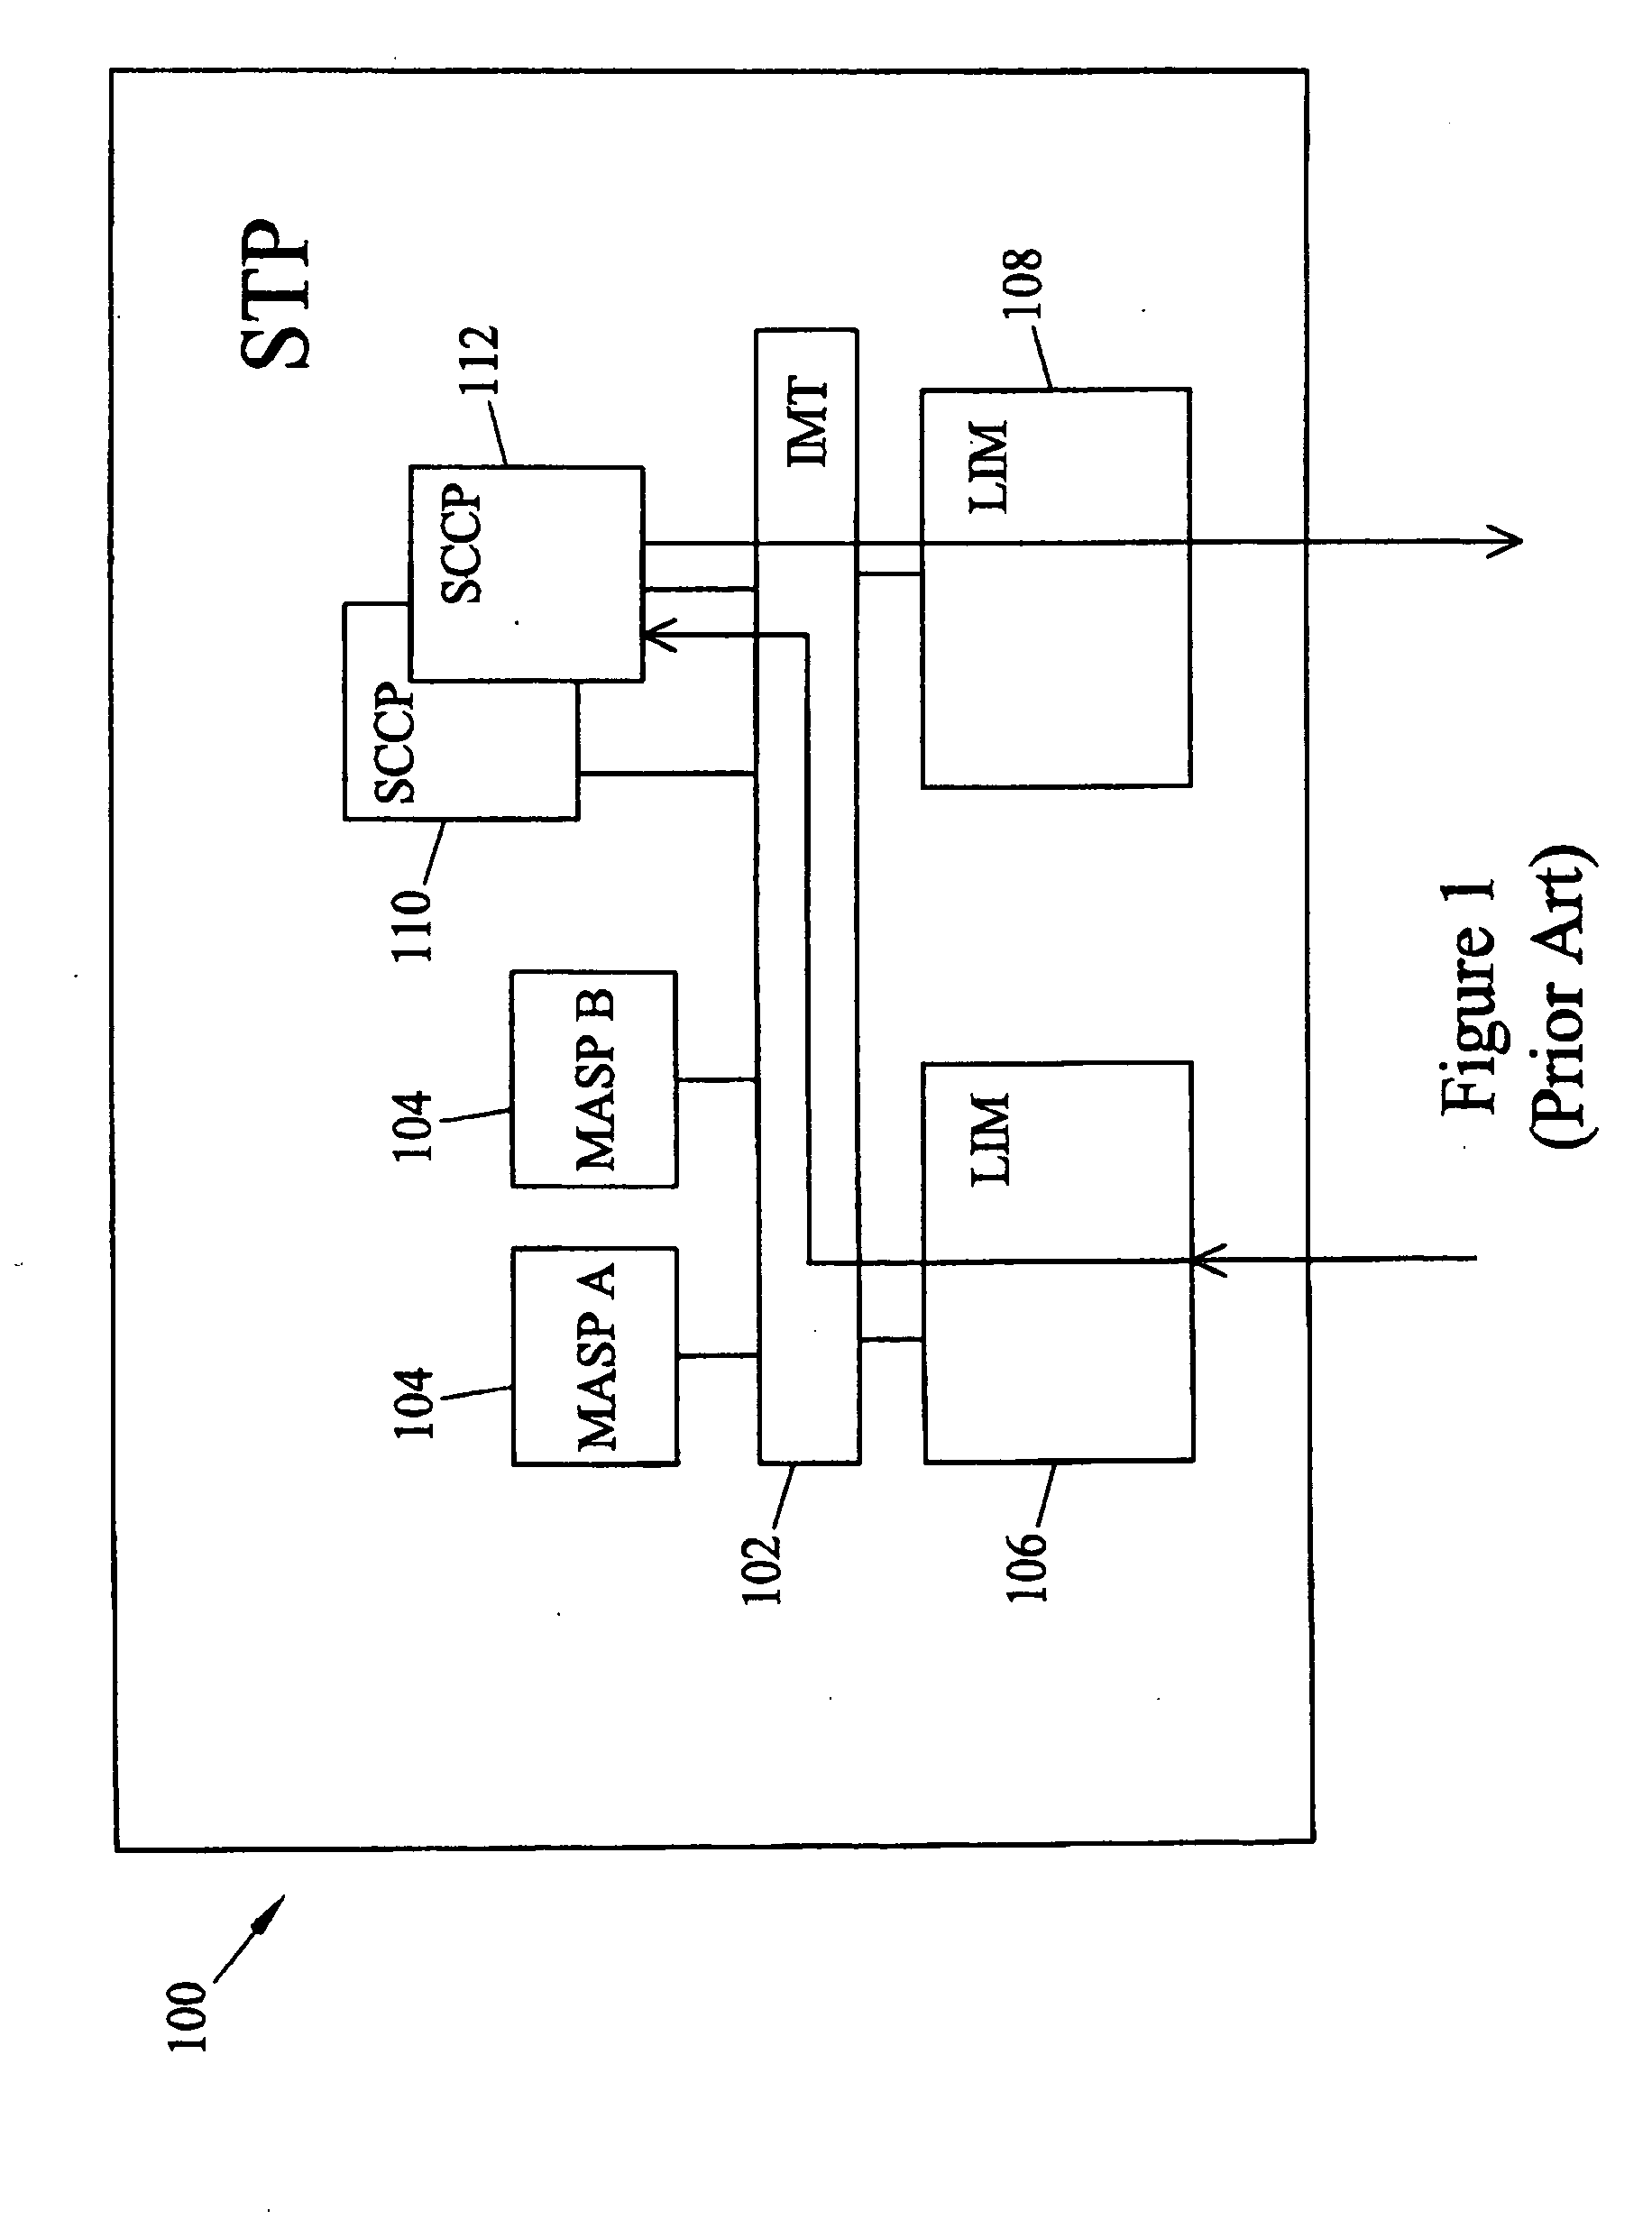 Systems and methods of performing stateful signaling transactions in a distributed processing environment